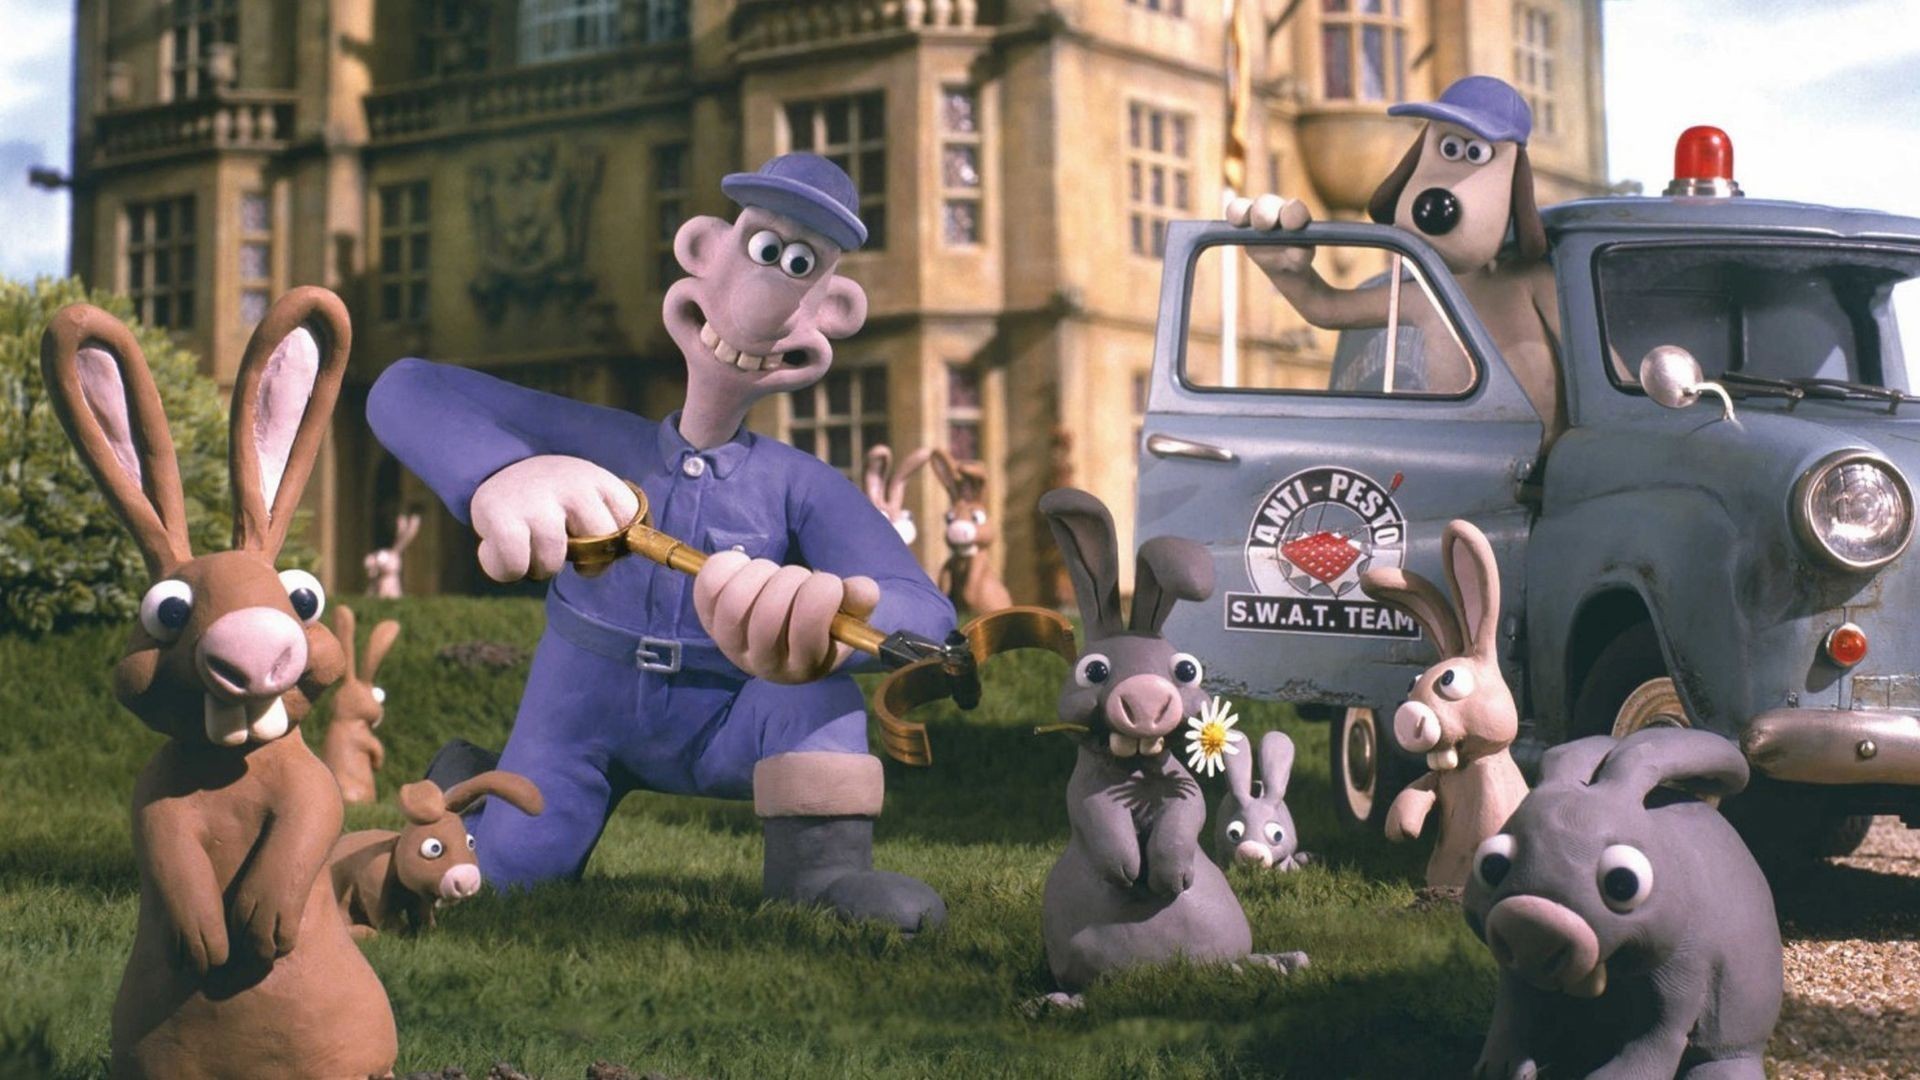 1920x1080 Wallace and Gromit: The Curse of the Were-Rabbit image